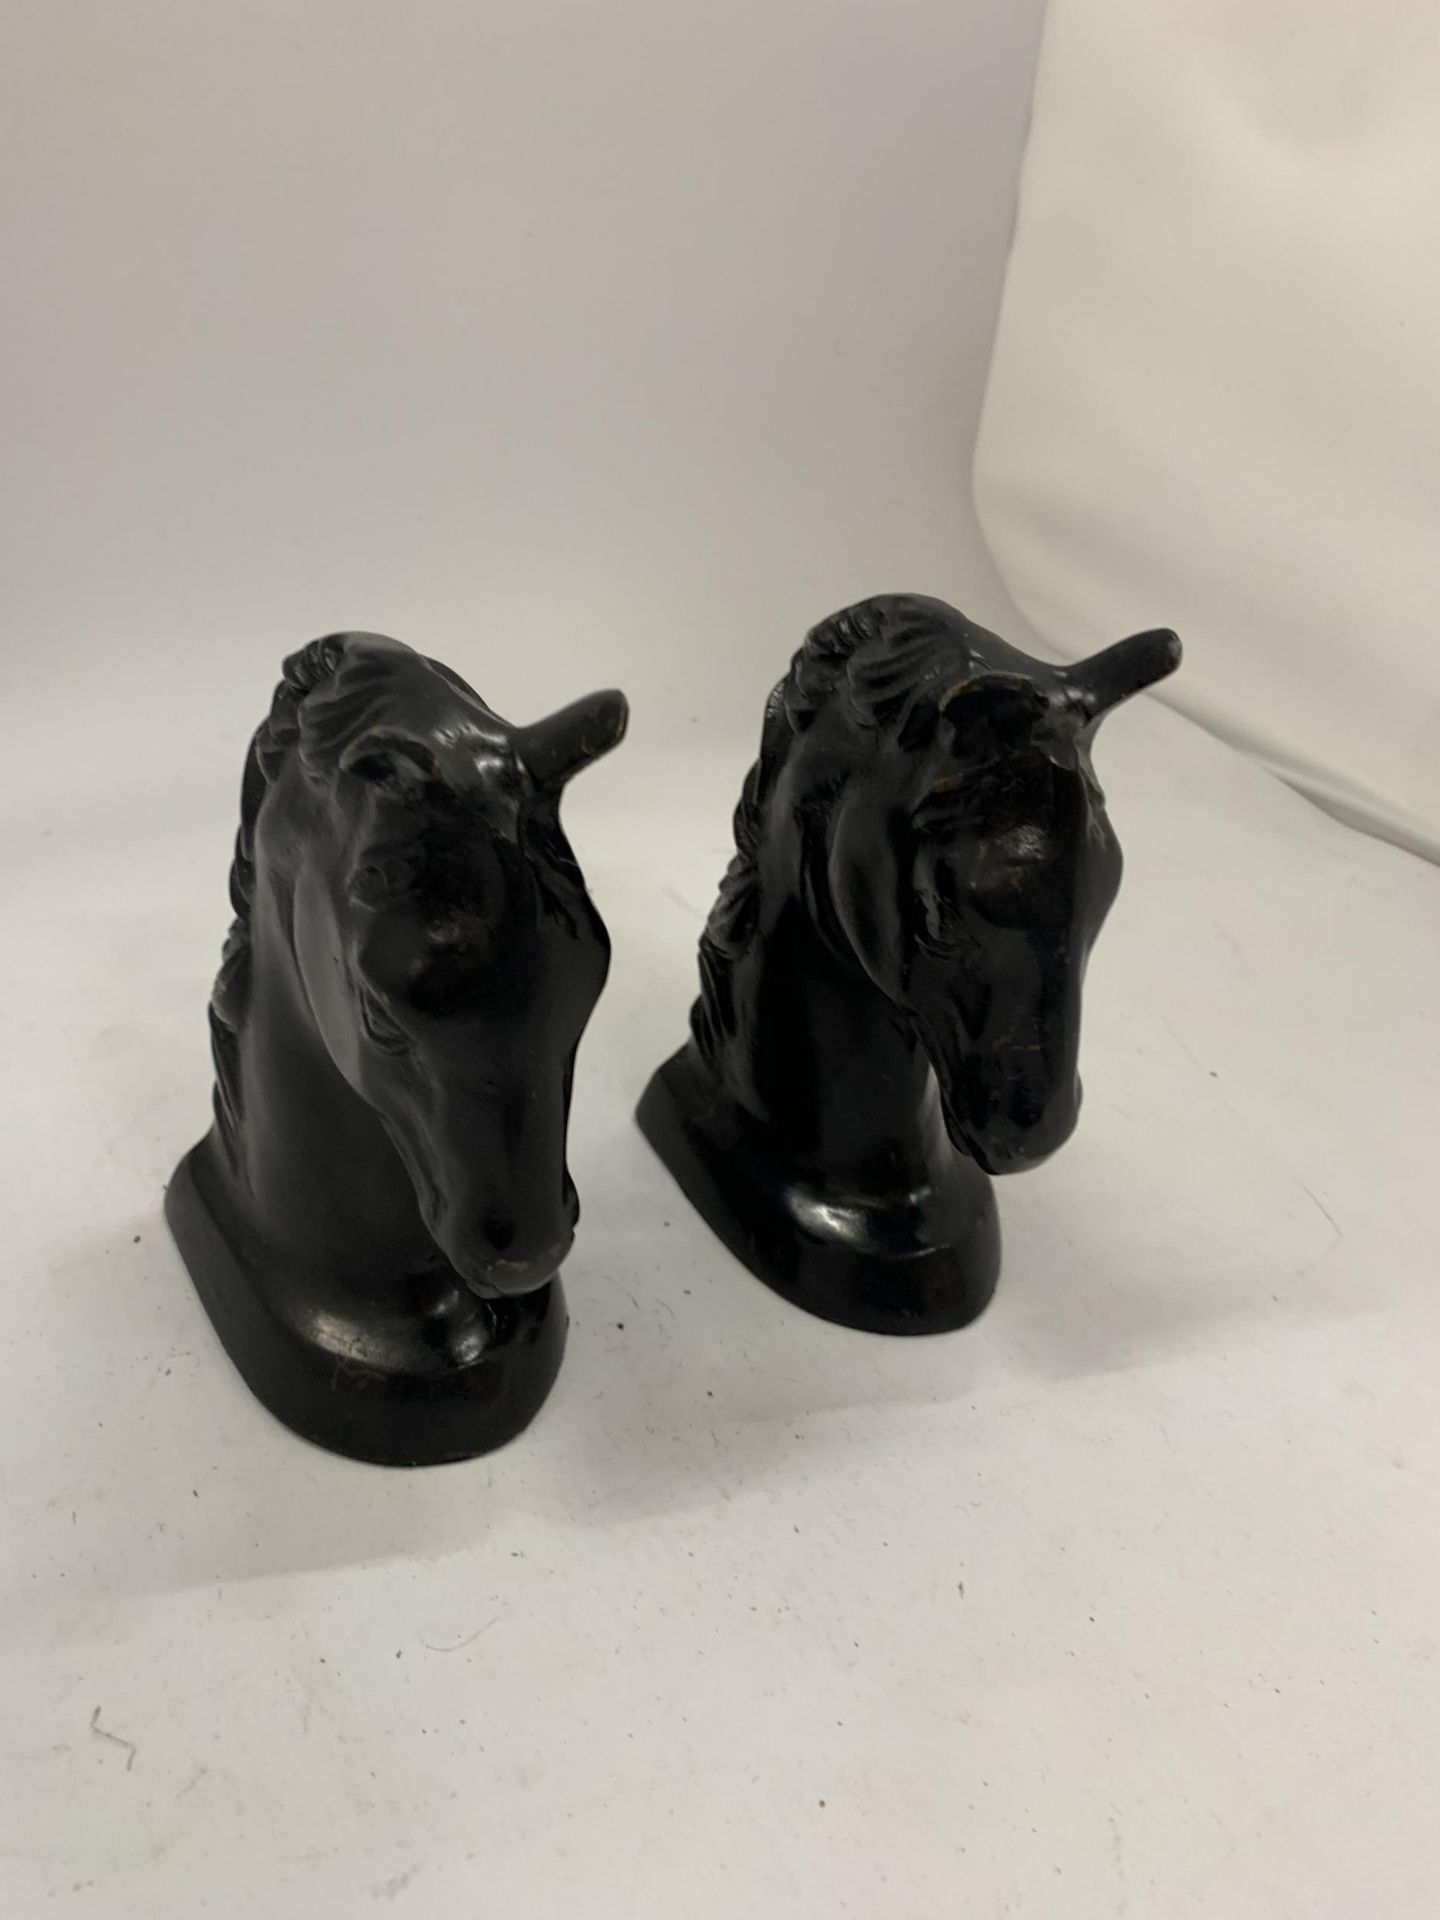 A PAIR OF STONE BLACK HORSES HEAD BOOK-ENDS HEIGHT 14CM - Image 3 of 8